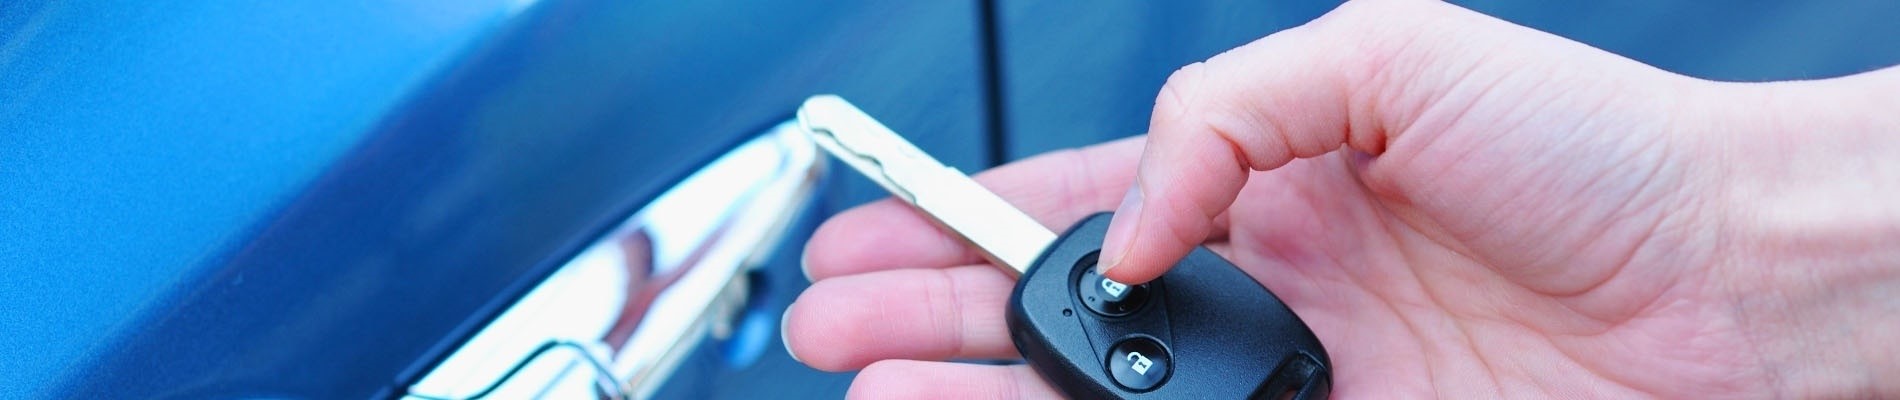 We carry car key replacement key blanks for all makes and models.